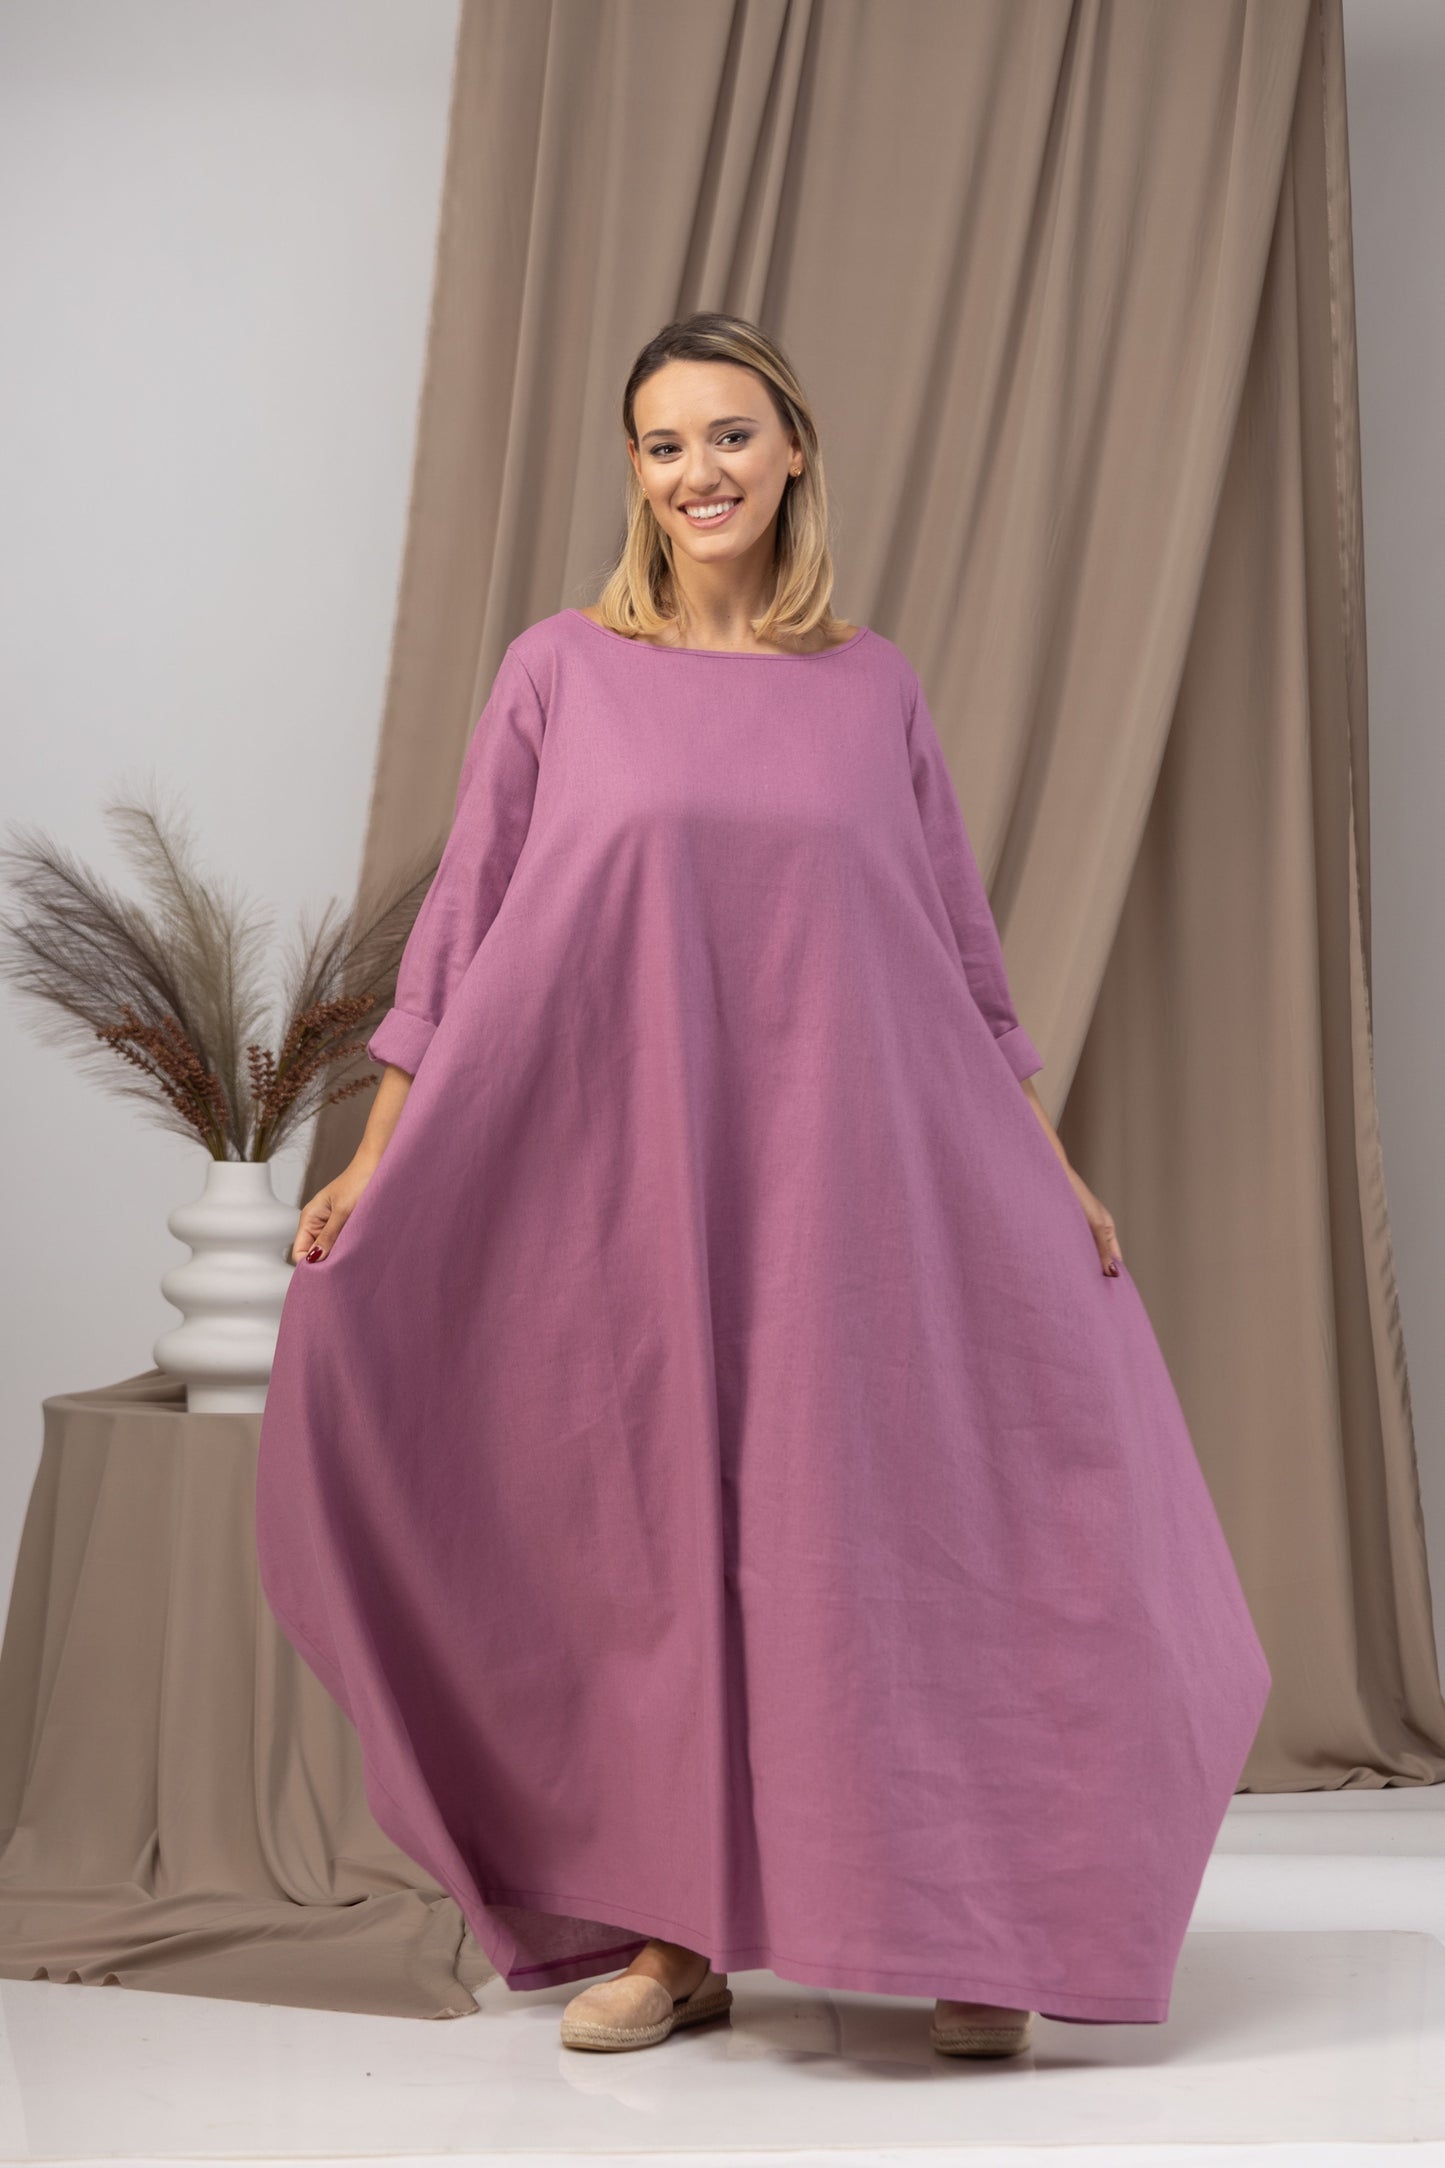 Draped balloon style design - from NikkaPlace | Effortless fashion for easy living